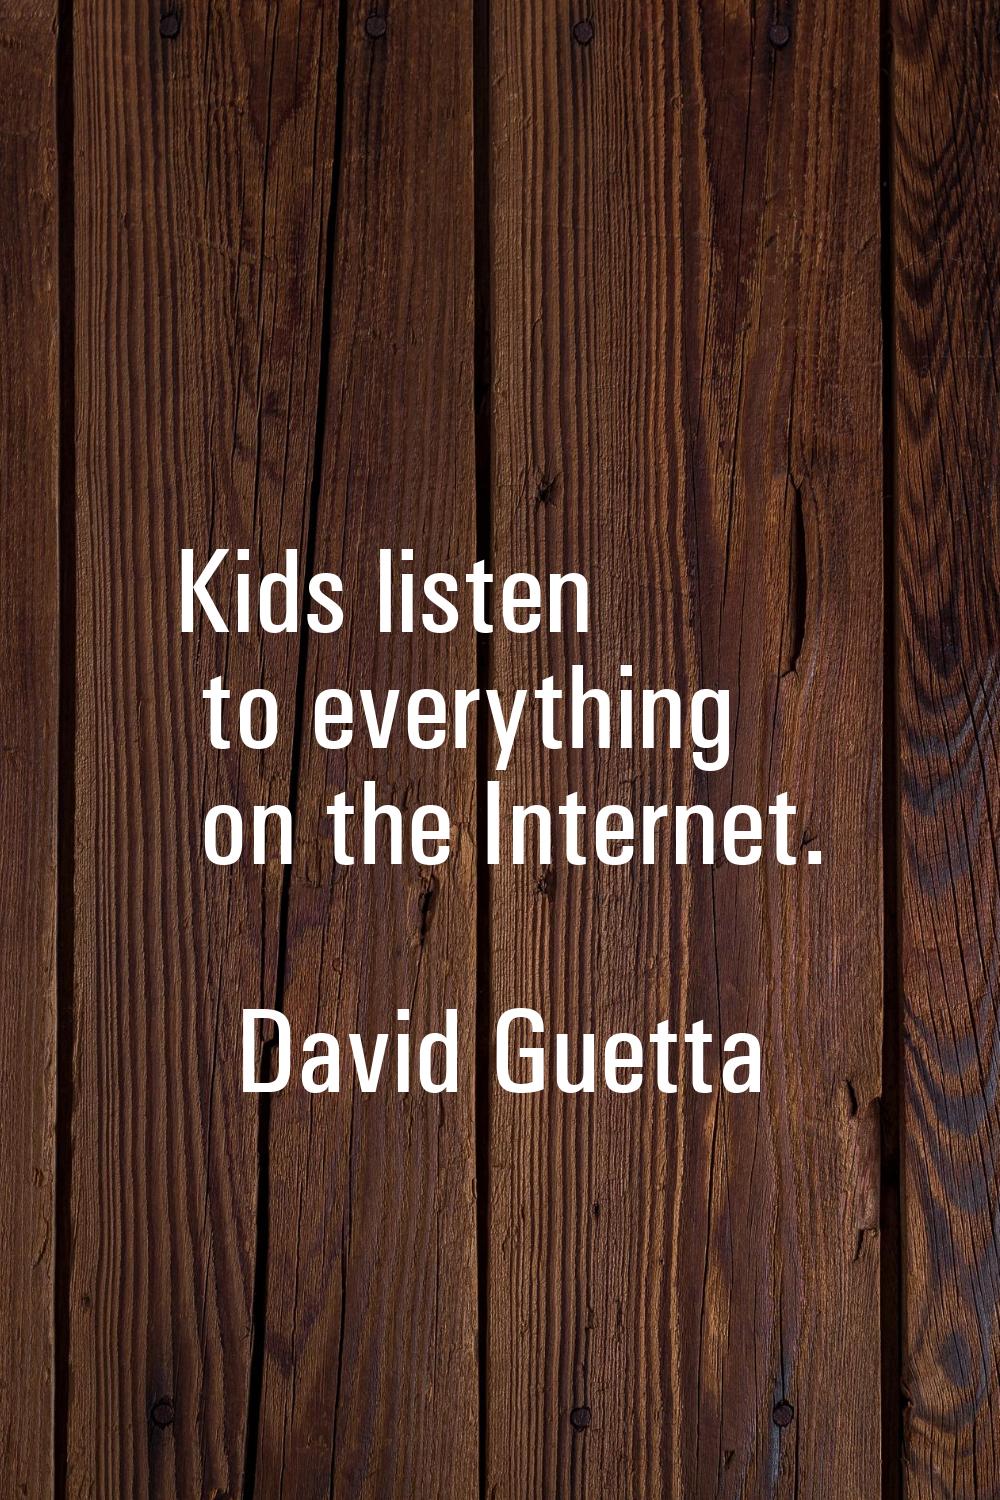 Kids listen to everything on the Internet.